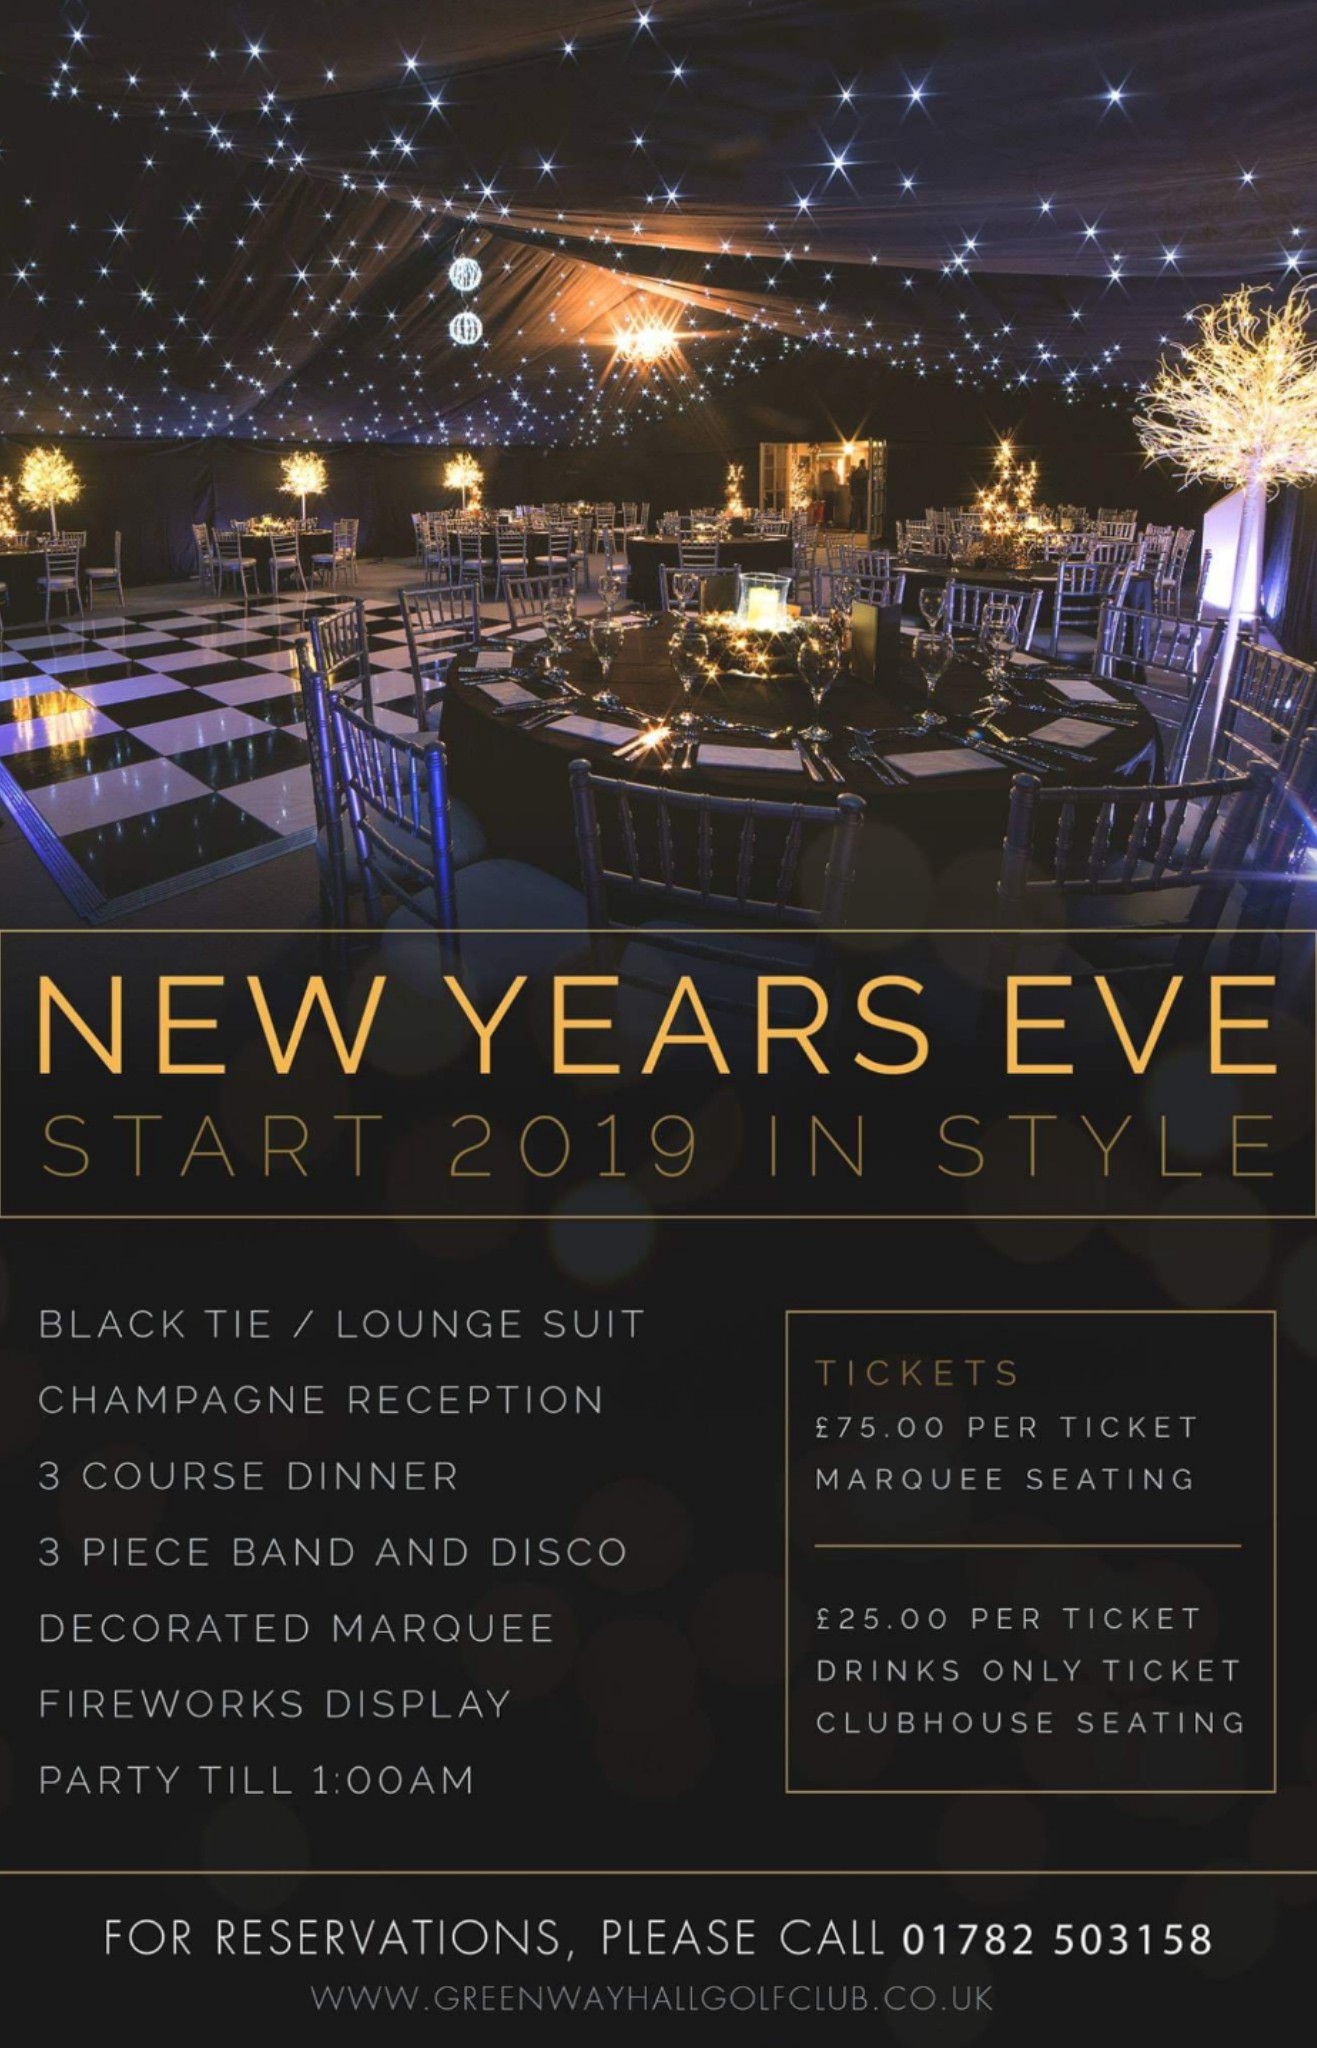 Tickets now available for New Years Eve 2019...